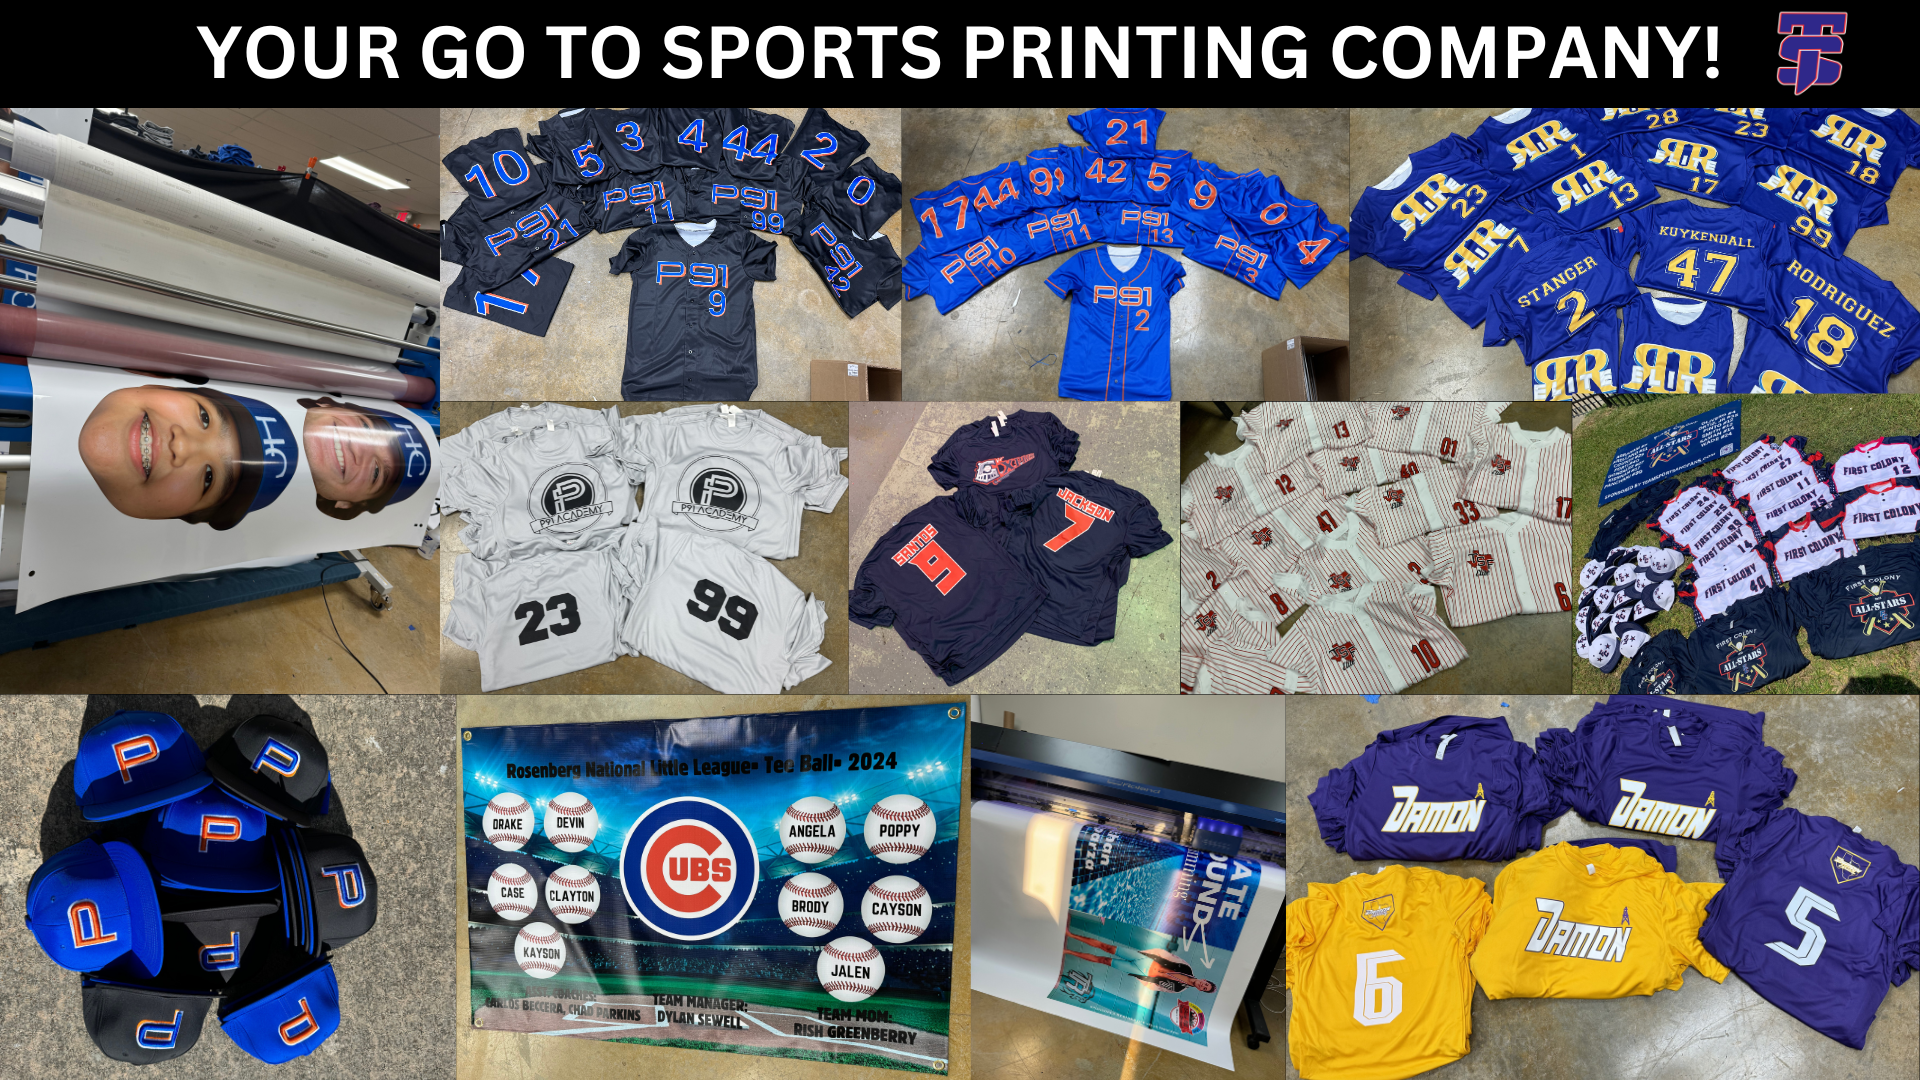 custom printed sports banners, signs, ports jerseys, practice jerseys fat heads